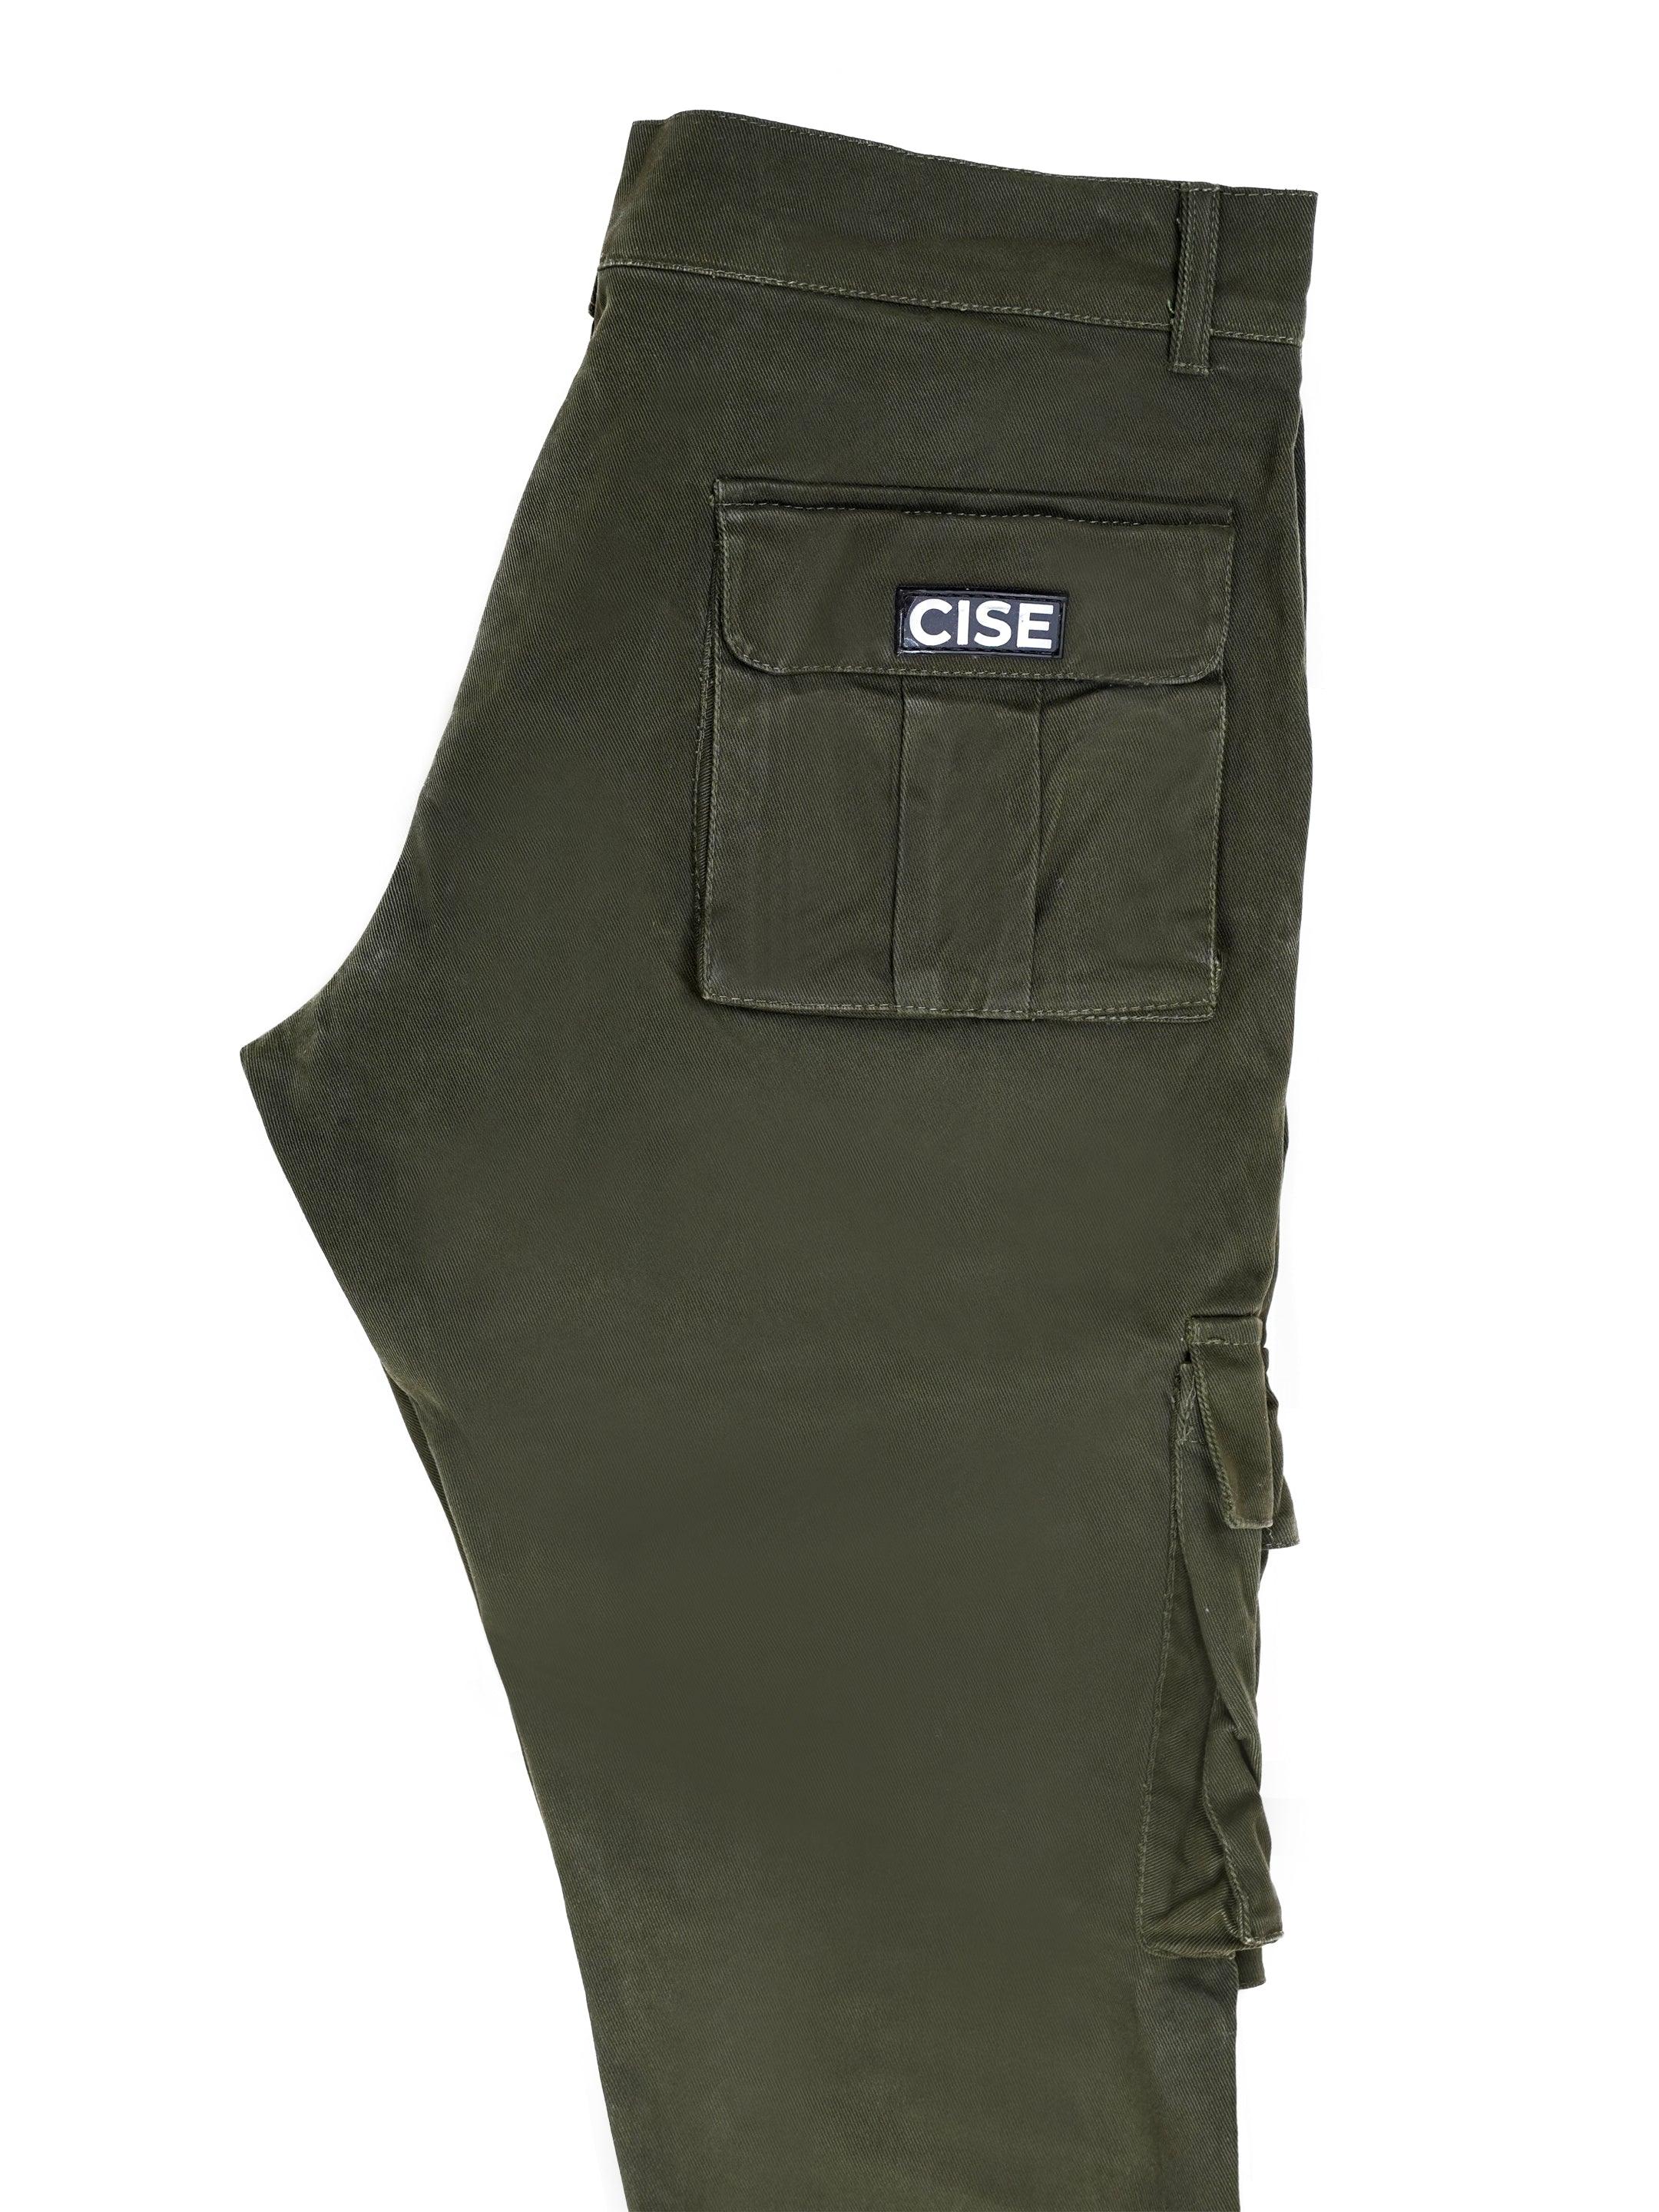 CISE - Strategy Cargo Olive Pants 